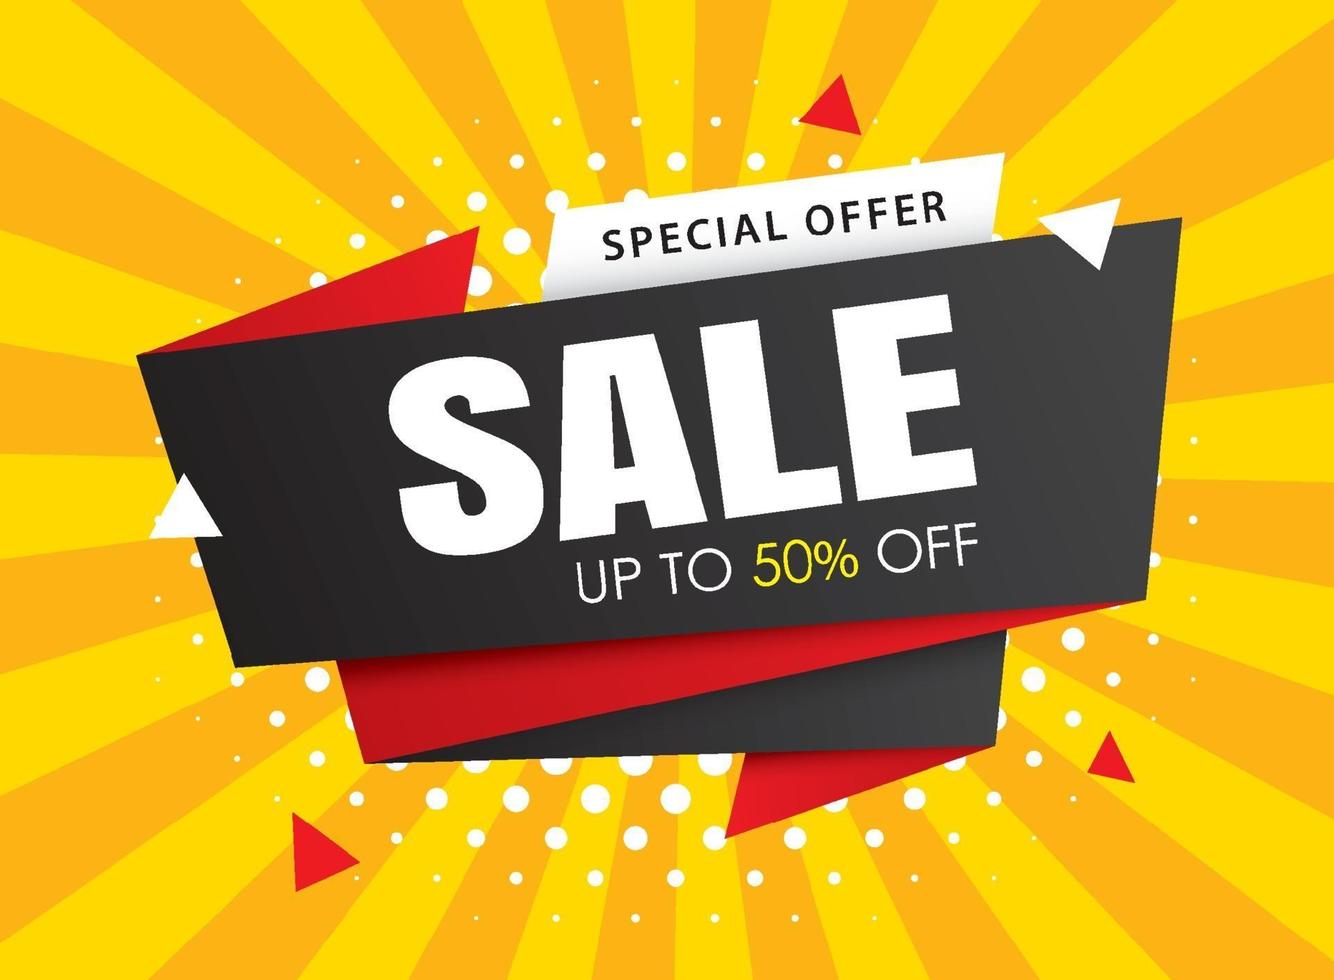 Sale banner templates. Vector illustrations for posters, shopping, email and newsletter designs, ads.